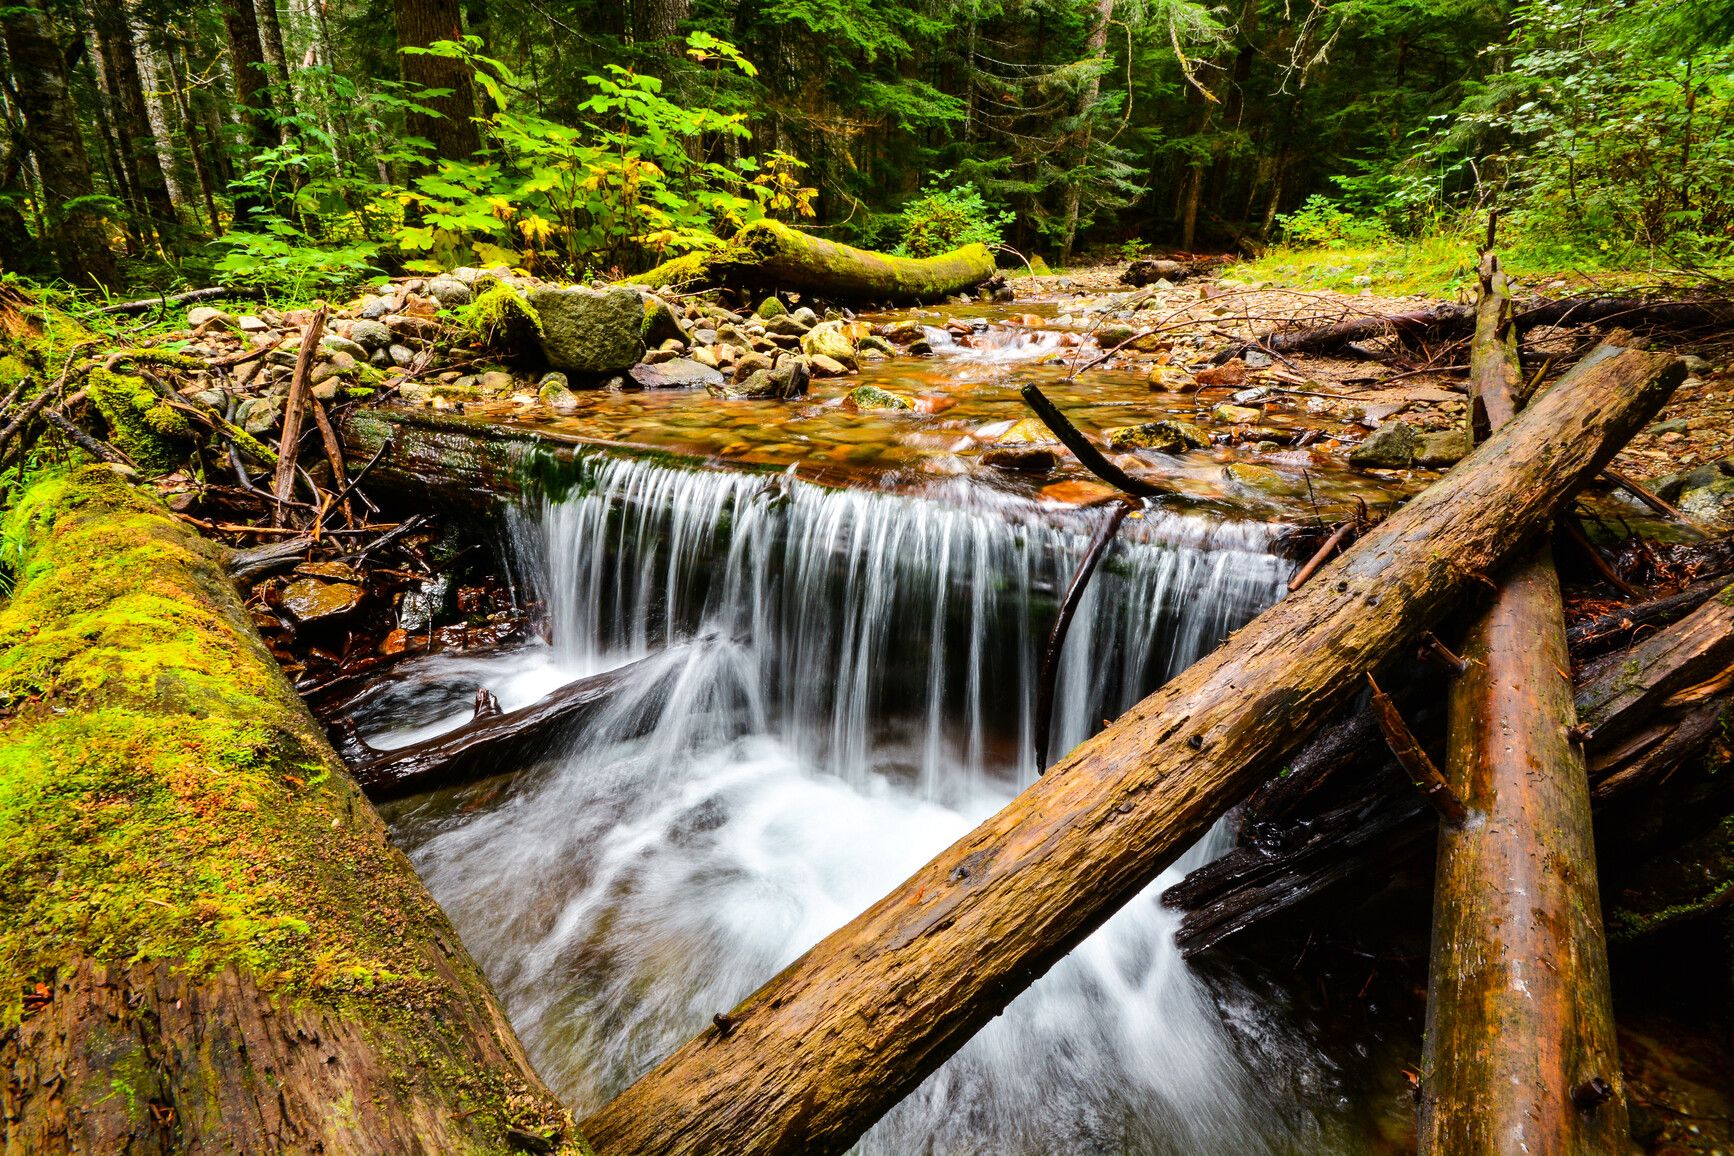 A creek flowing through the forest creates a small waterfall in Sx̱ótsaqel/Chilliwack Lake Park.